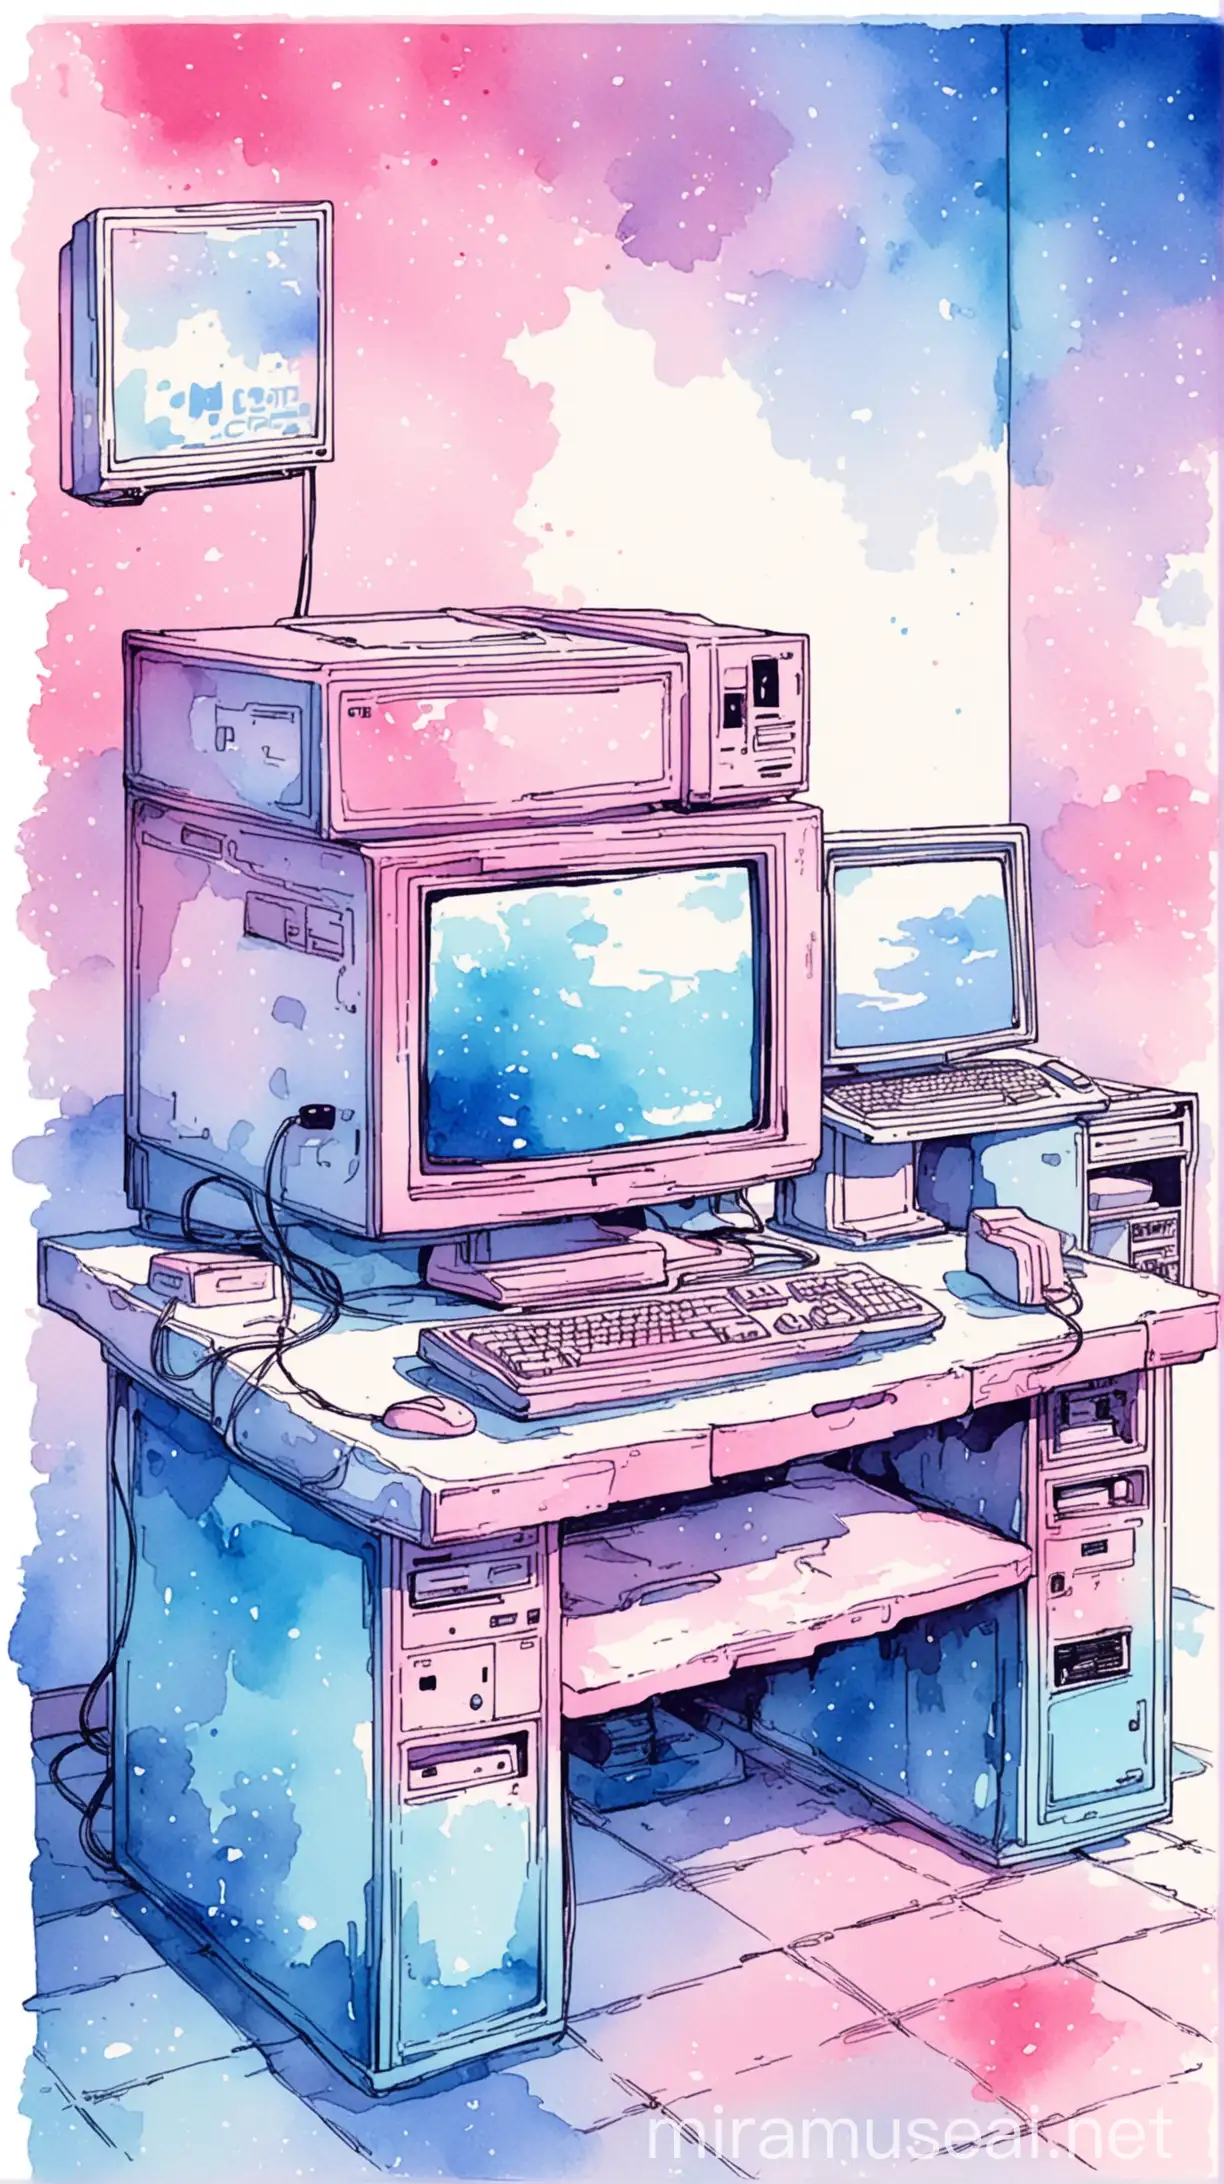 Vintage Cyber Cafe with Cute Anime Aesthetic and Retro Color Palette